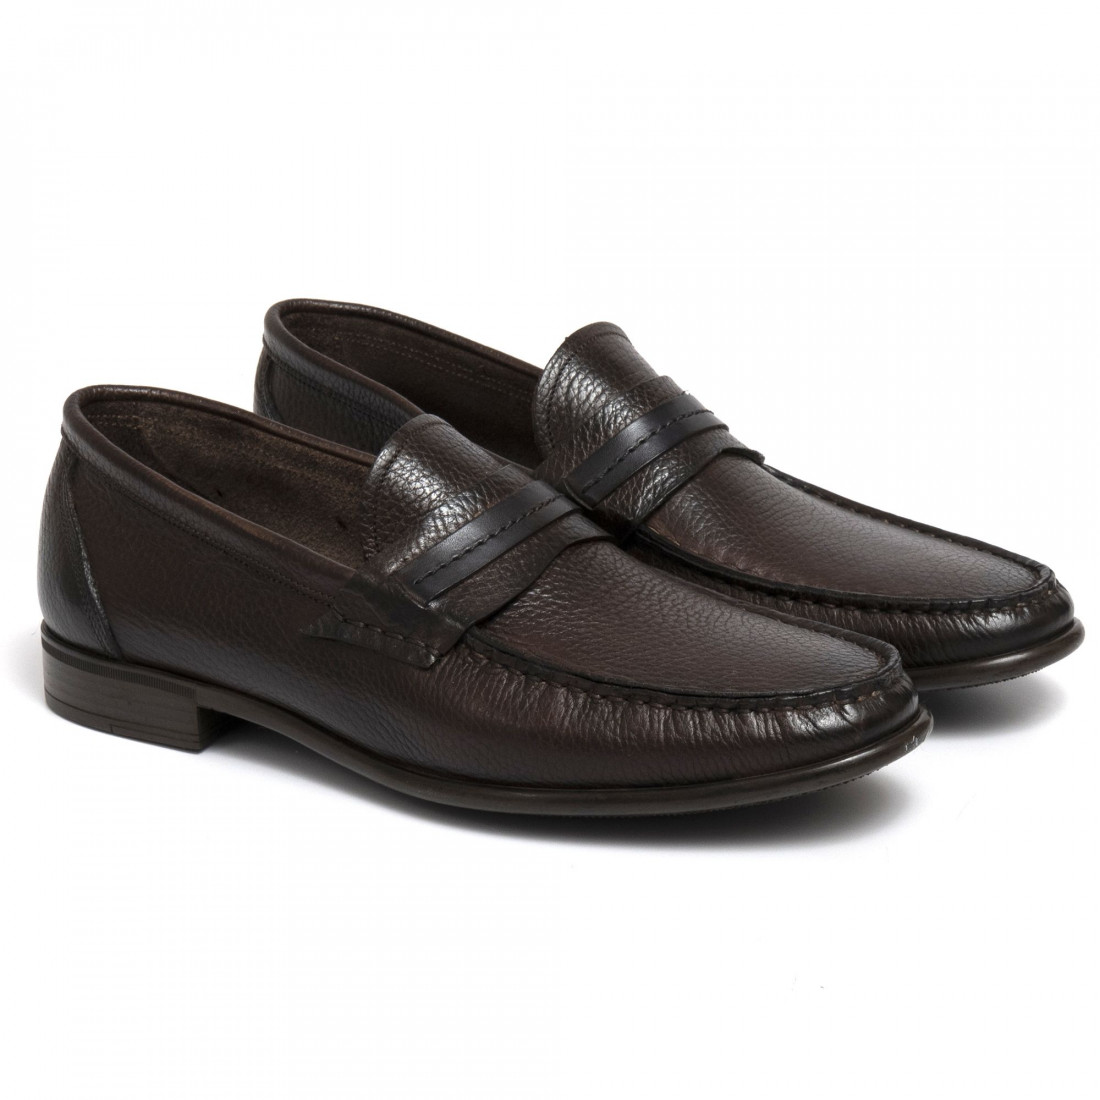 Brown John White men's loafers in unlined leather